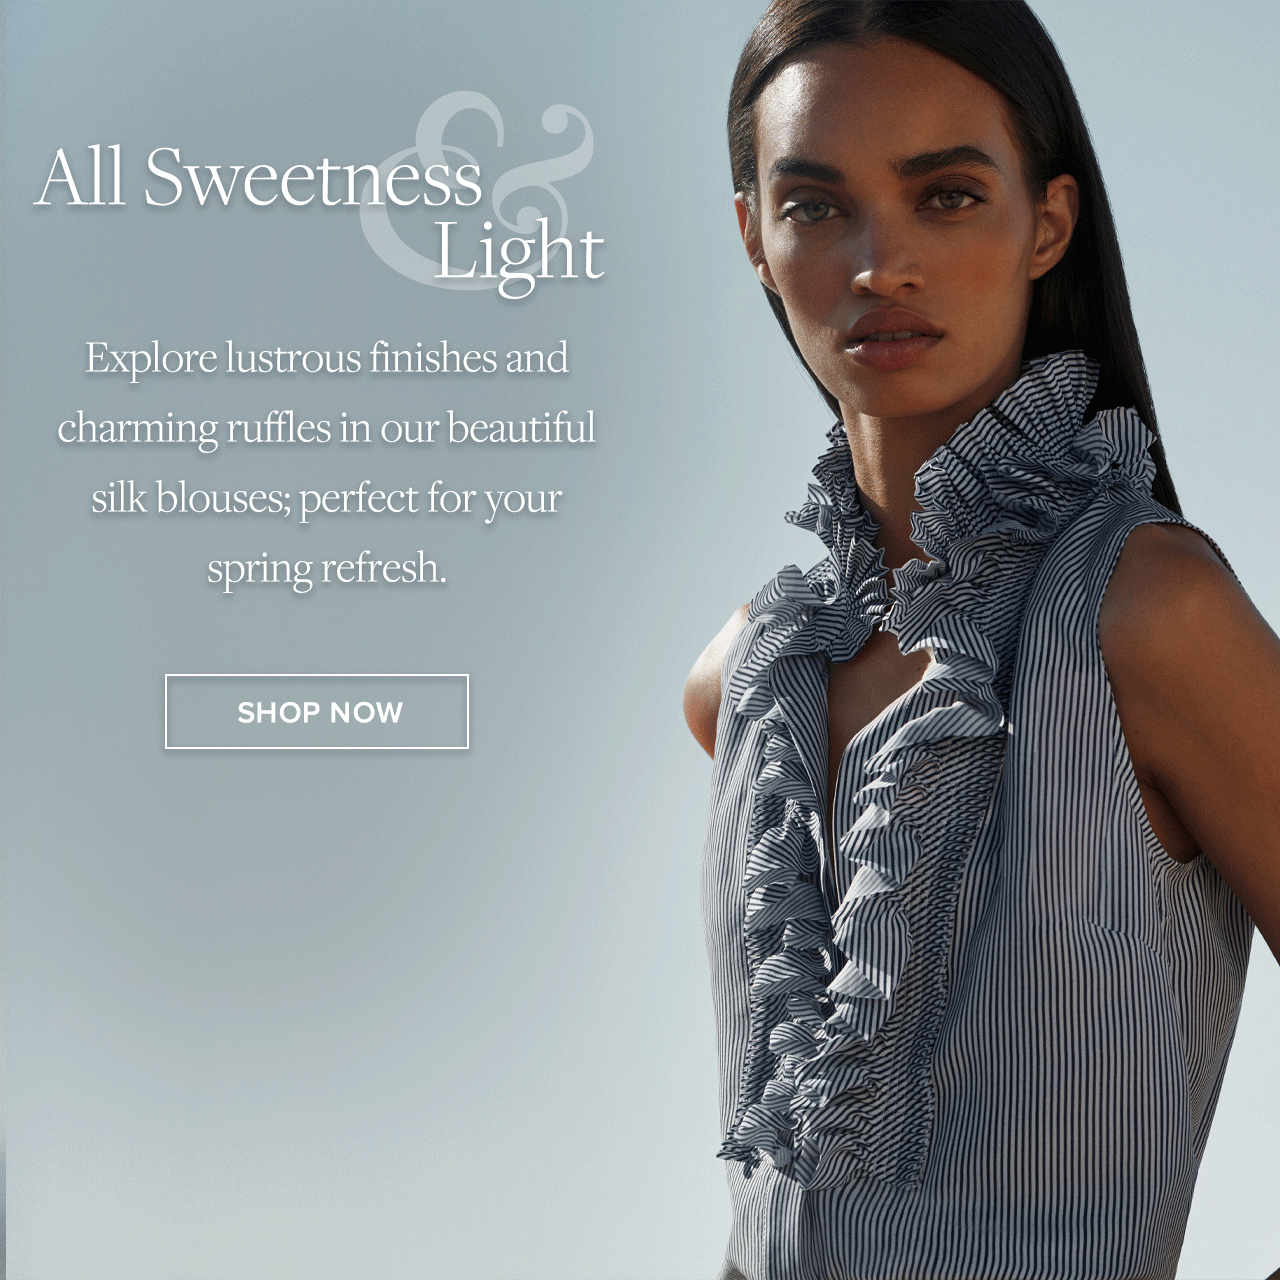 All Sweetness and Light Explore lustrous finishes and charming ruffles in our beautiful silk blouses; perfect for your spring refresh. Shop Now.